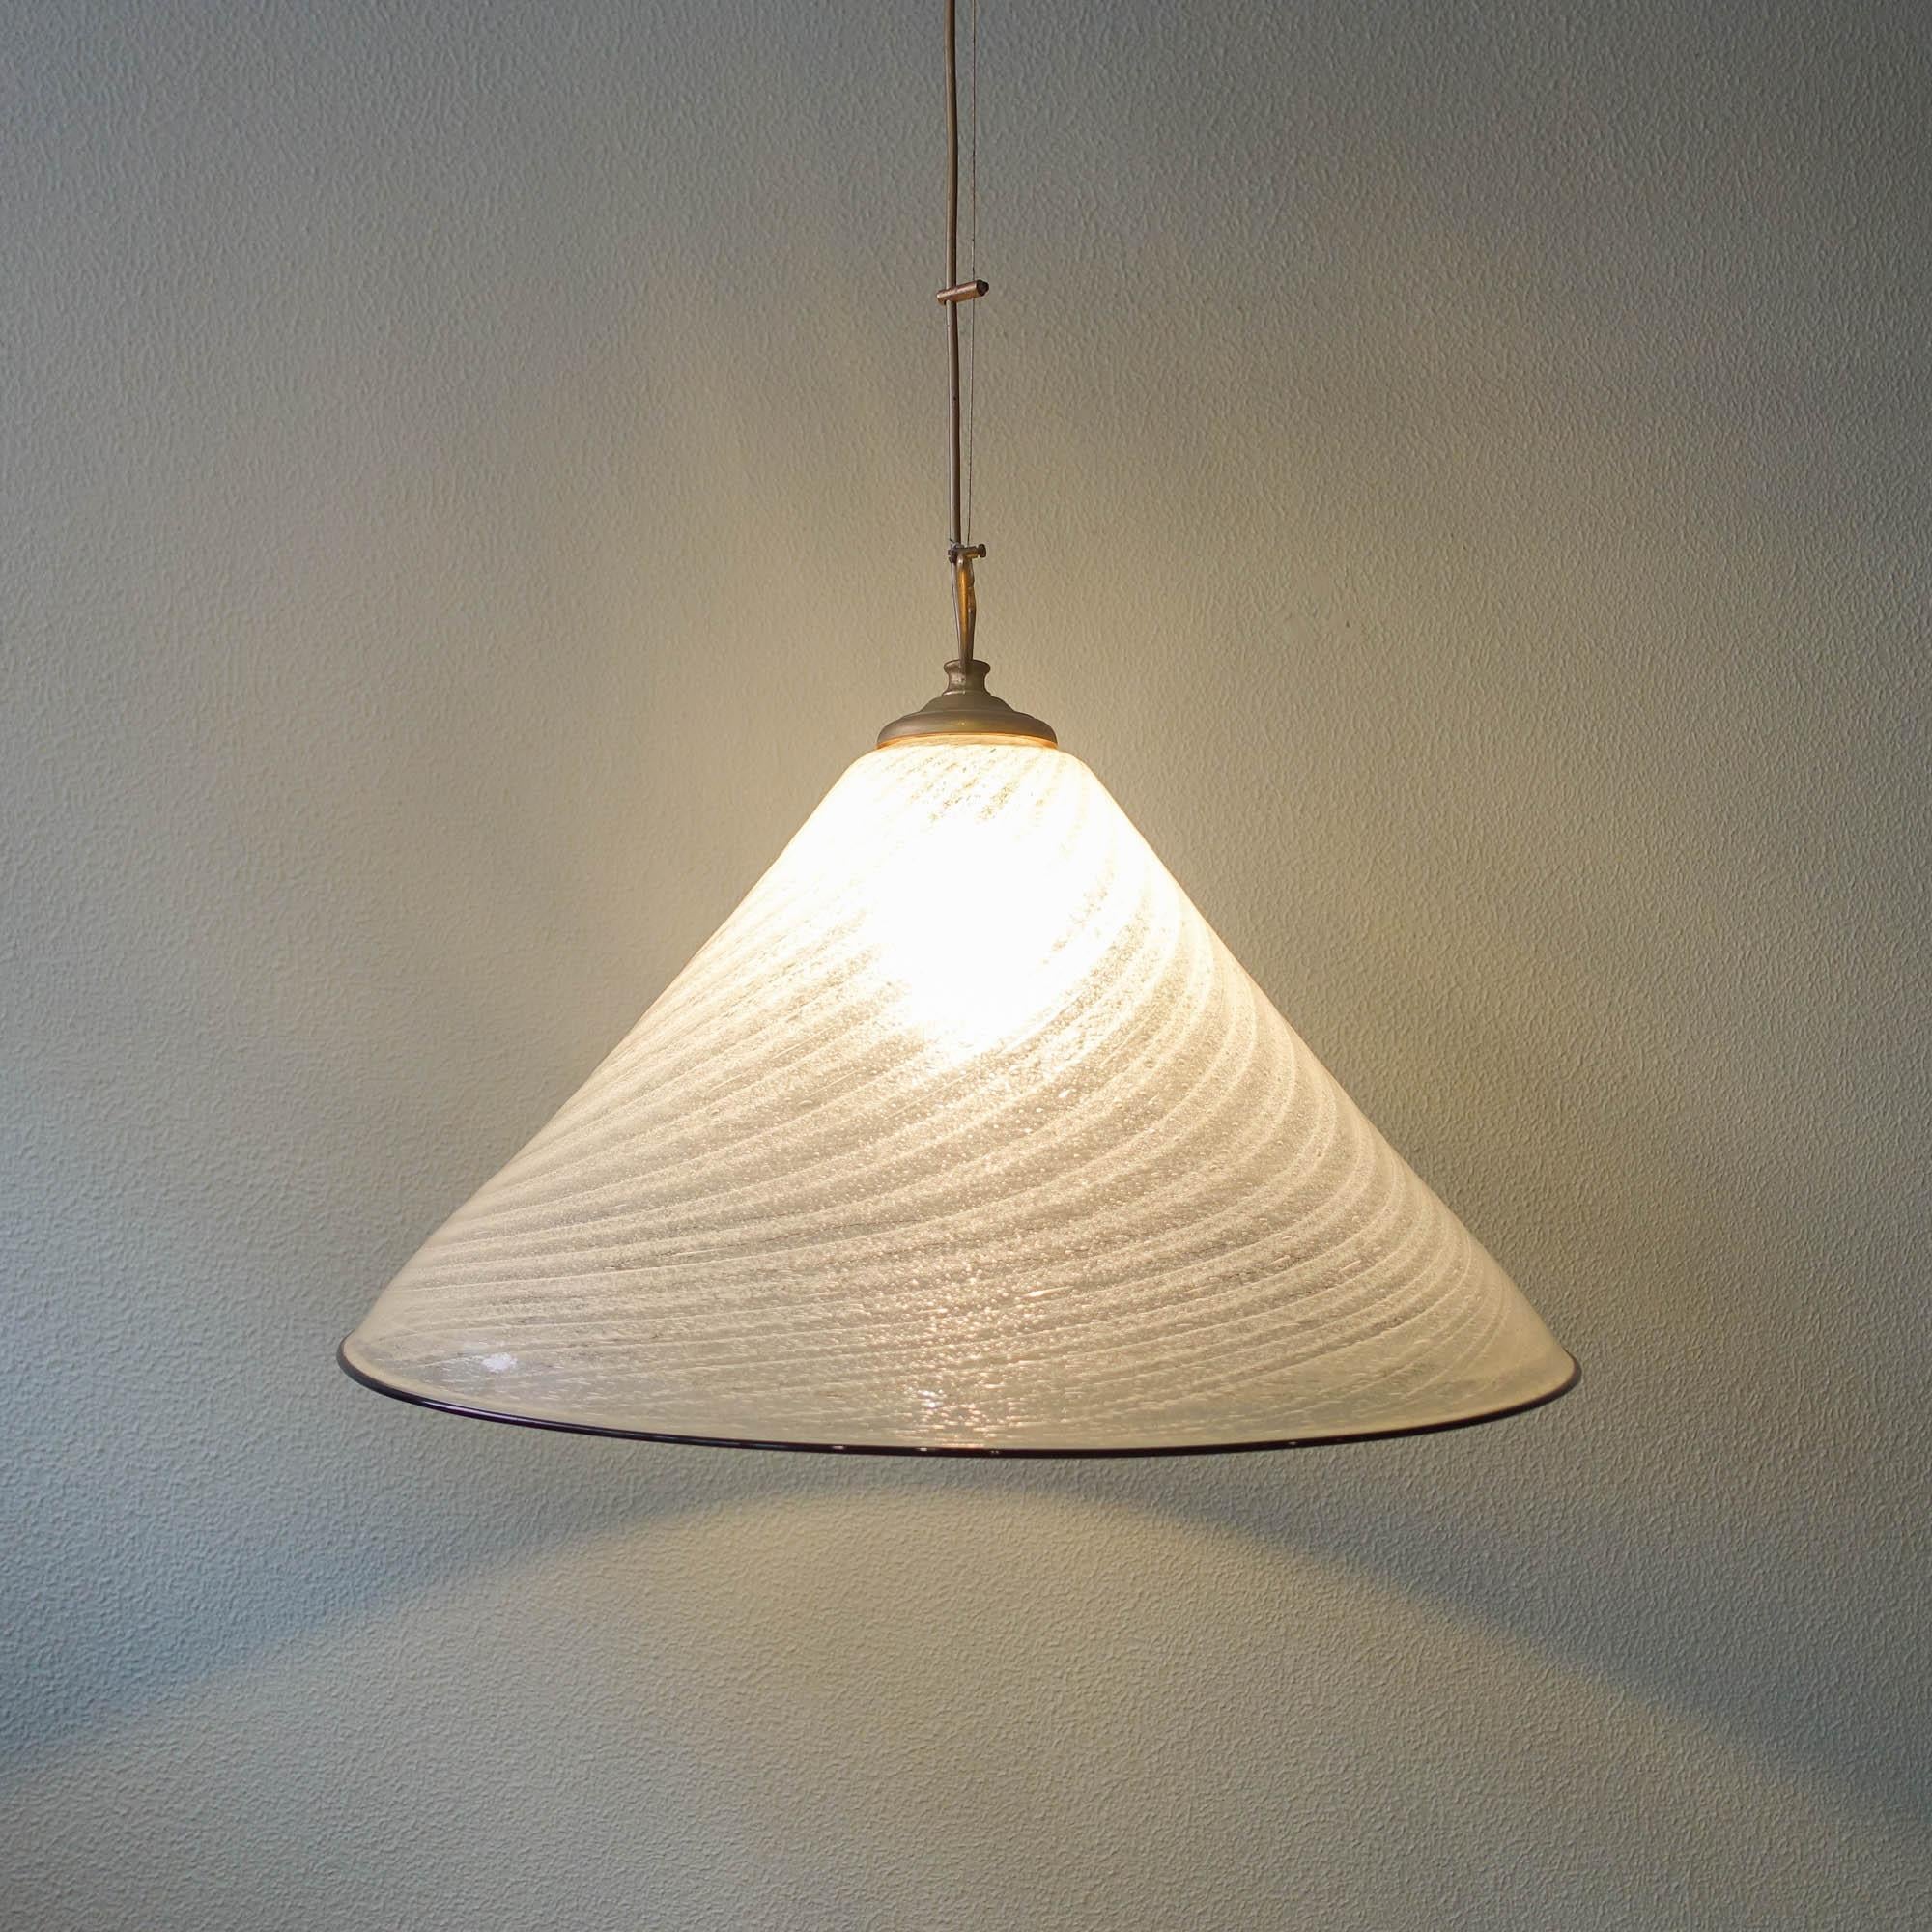 Mid-Century Modern Large Vintage Swirled Murano Glass Pendant Lamp from La Murrina, Italy, 1970s For Sale